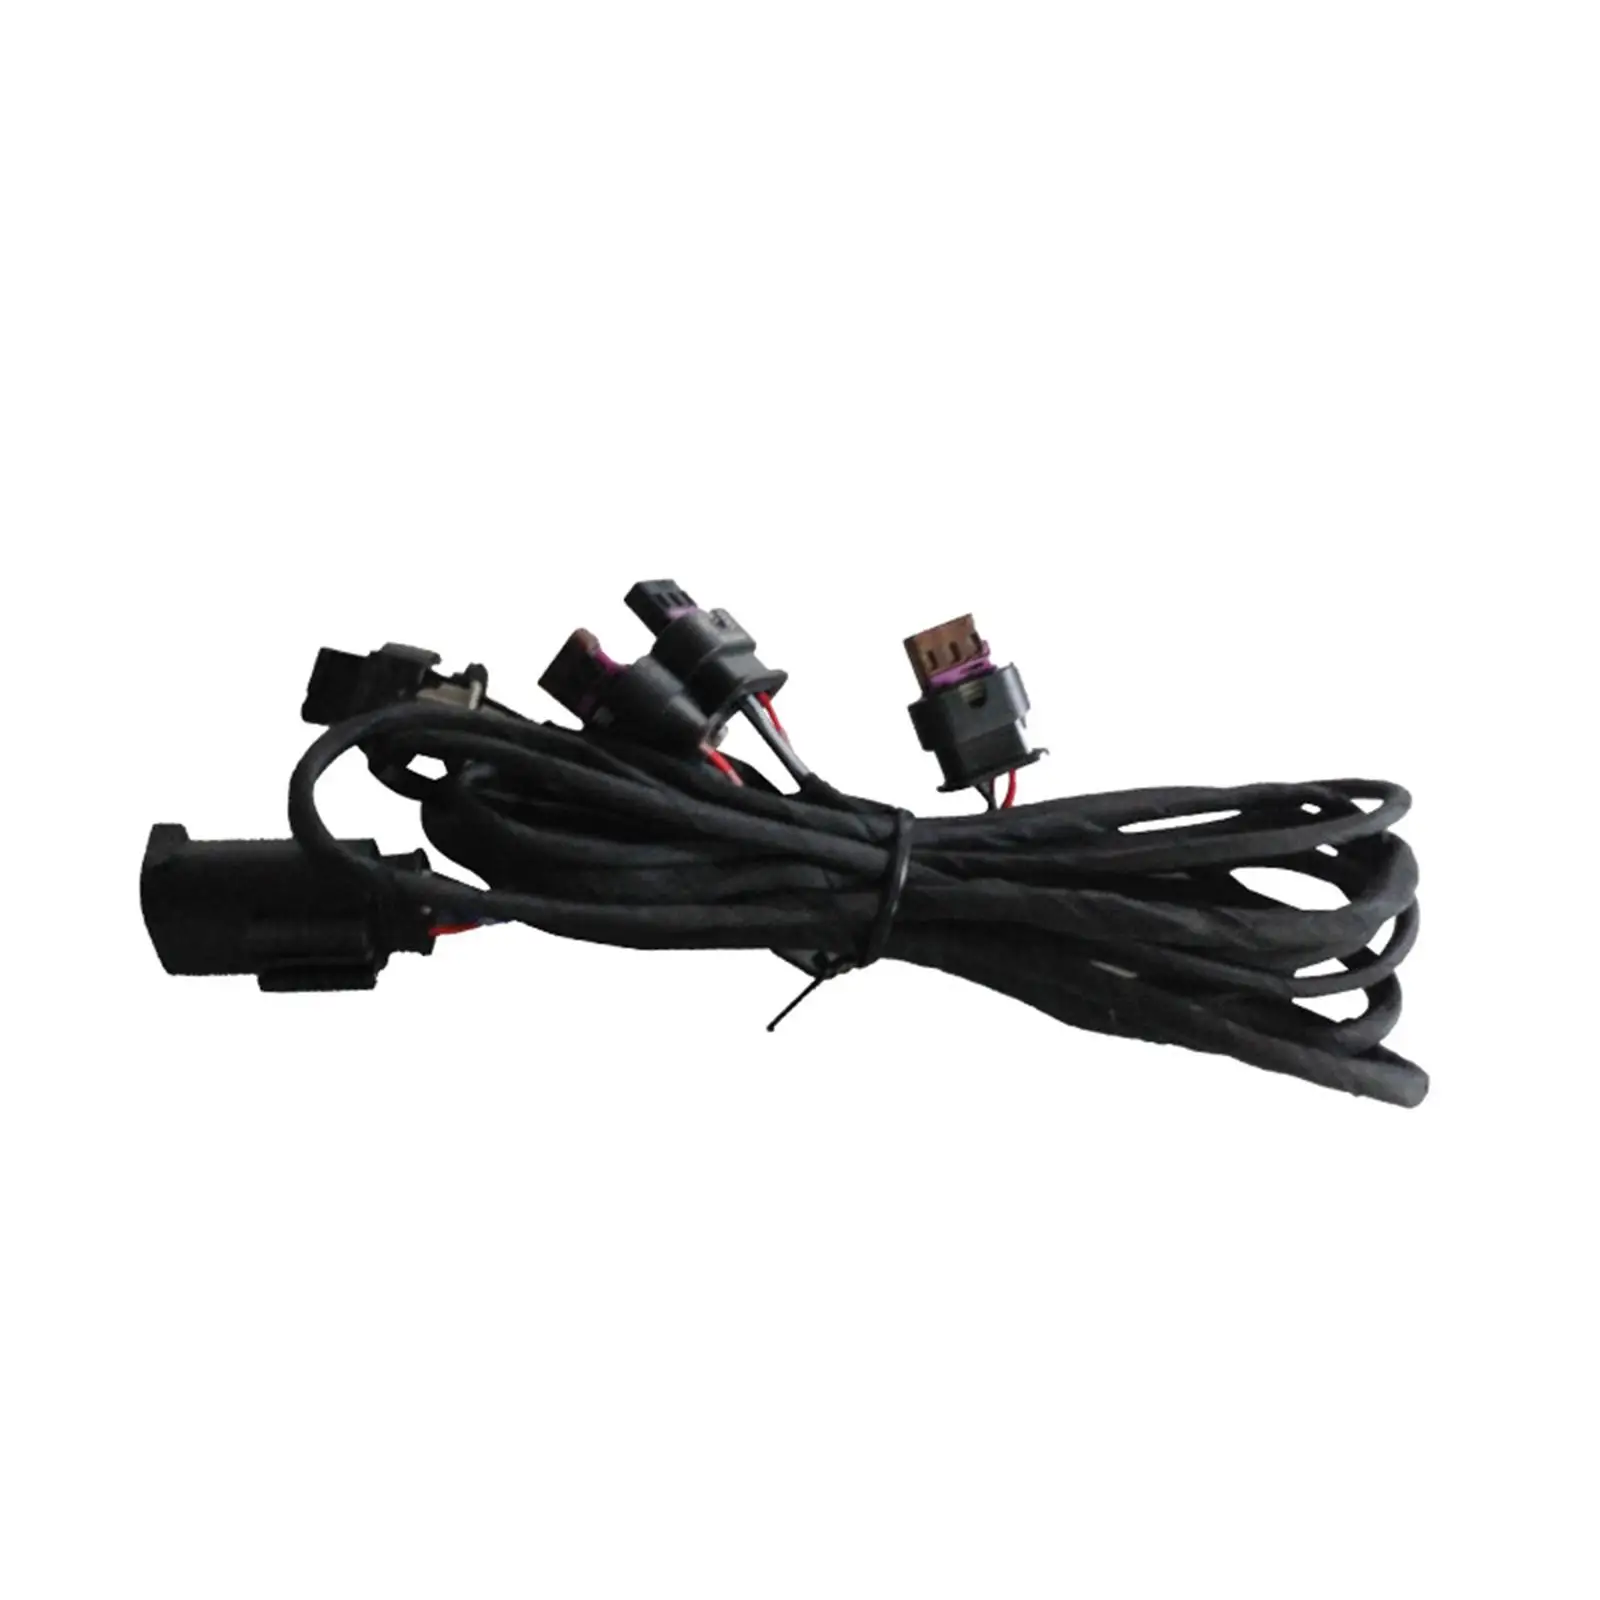 Bumper Parking Sensor Cables Replaces Front Rear Bumper Wiring Harness for BMW 3 Series 4 Series F31 F30 F34 GT Lci F33 Lci